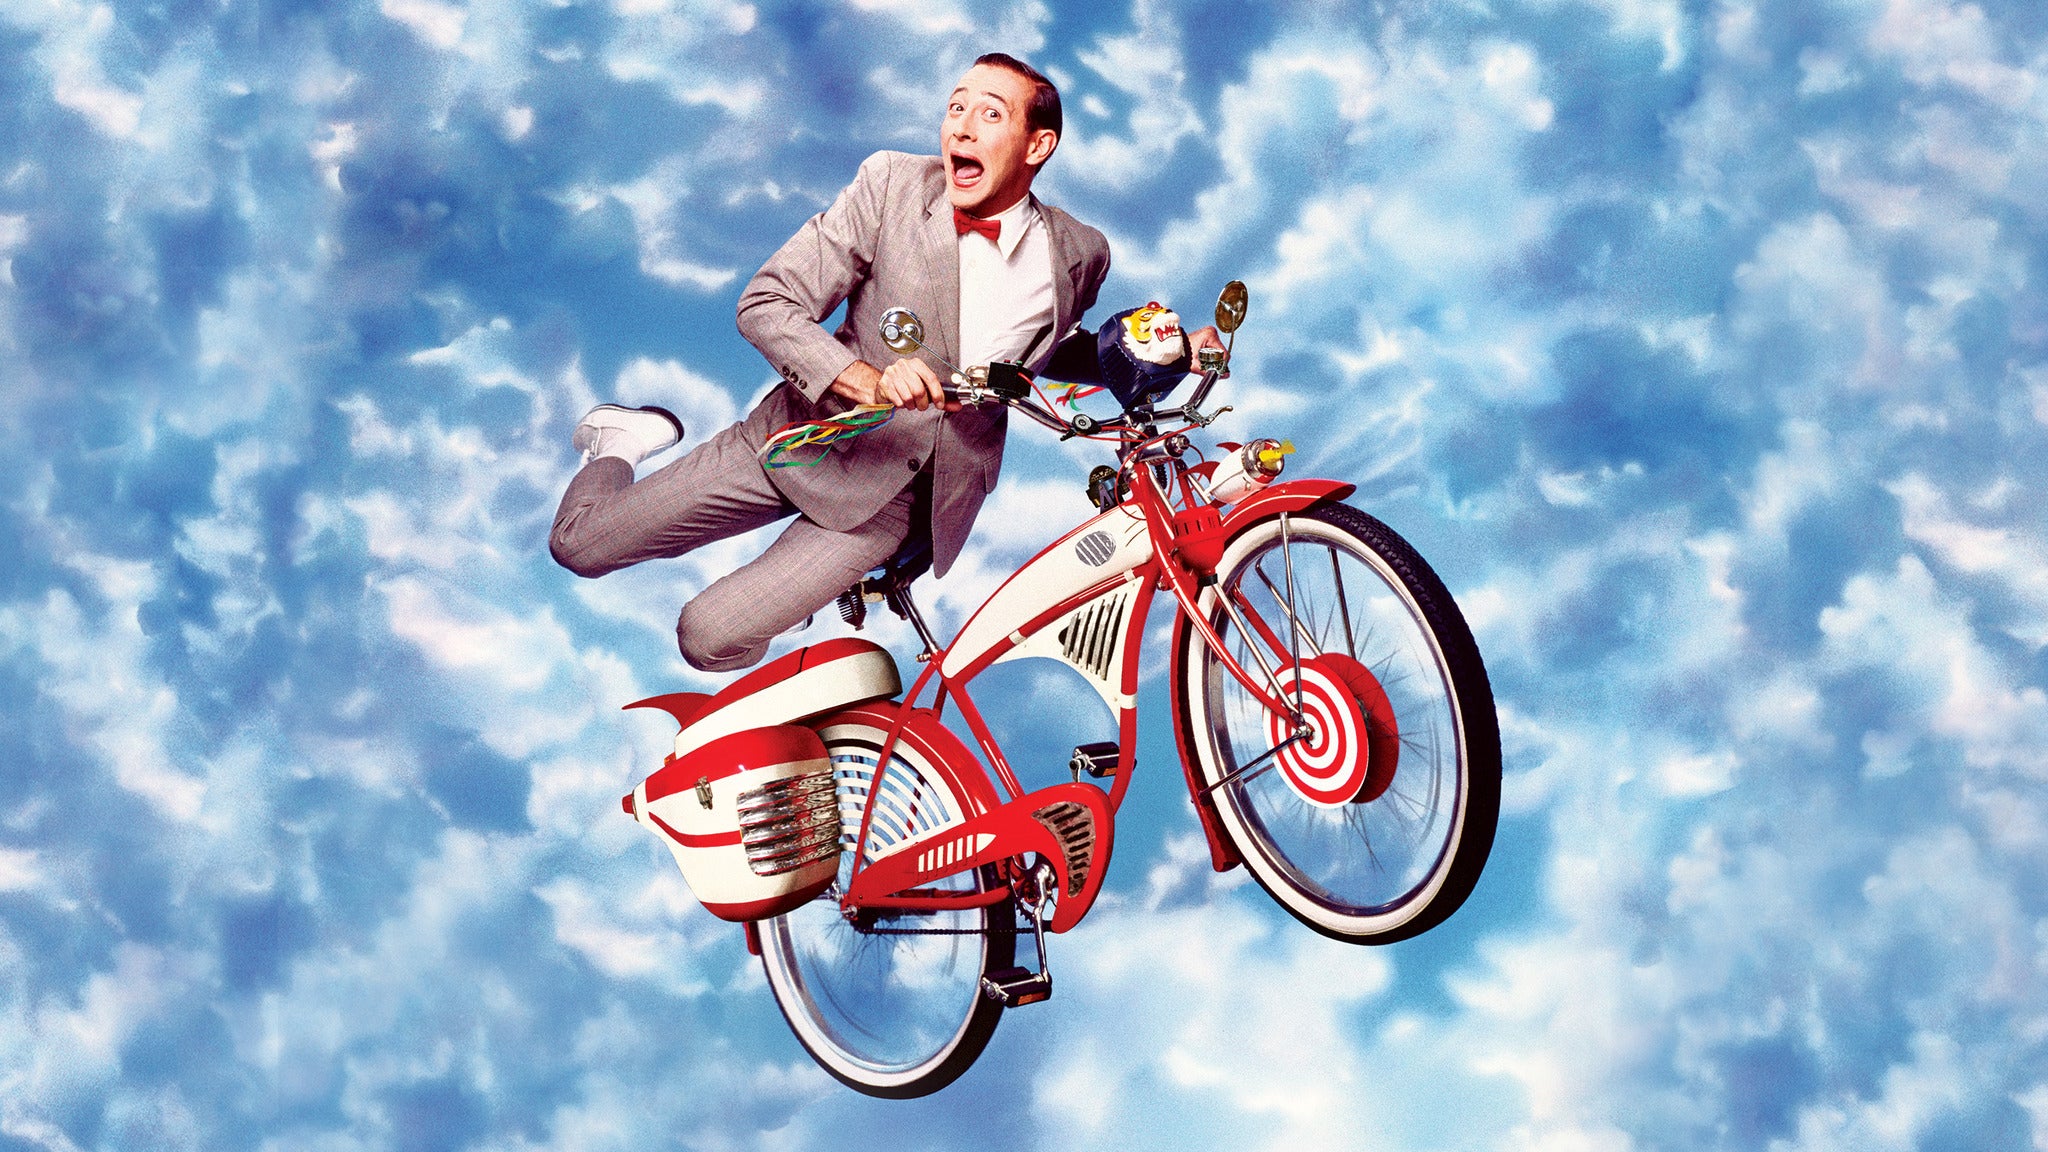 Pee-wee's Big Adventure 35th Anniversary Tour with Paul Reubens in Detroit promo photo for Official Platinum presale offer code